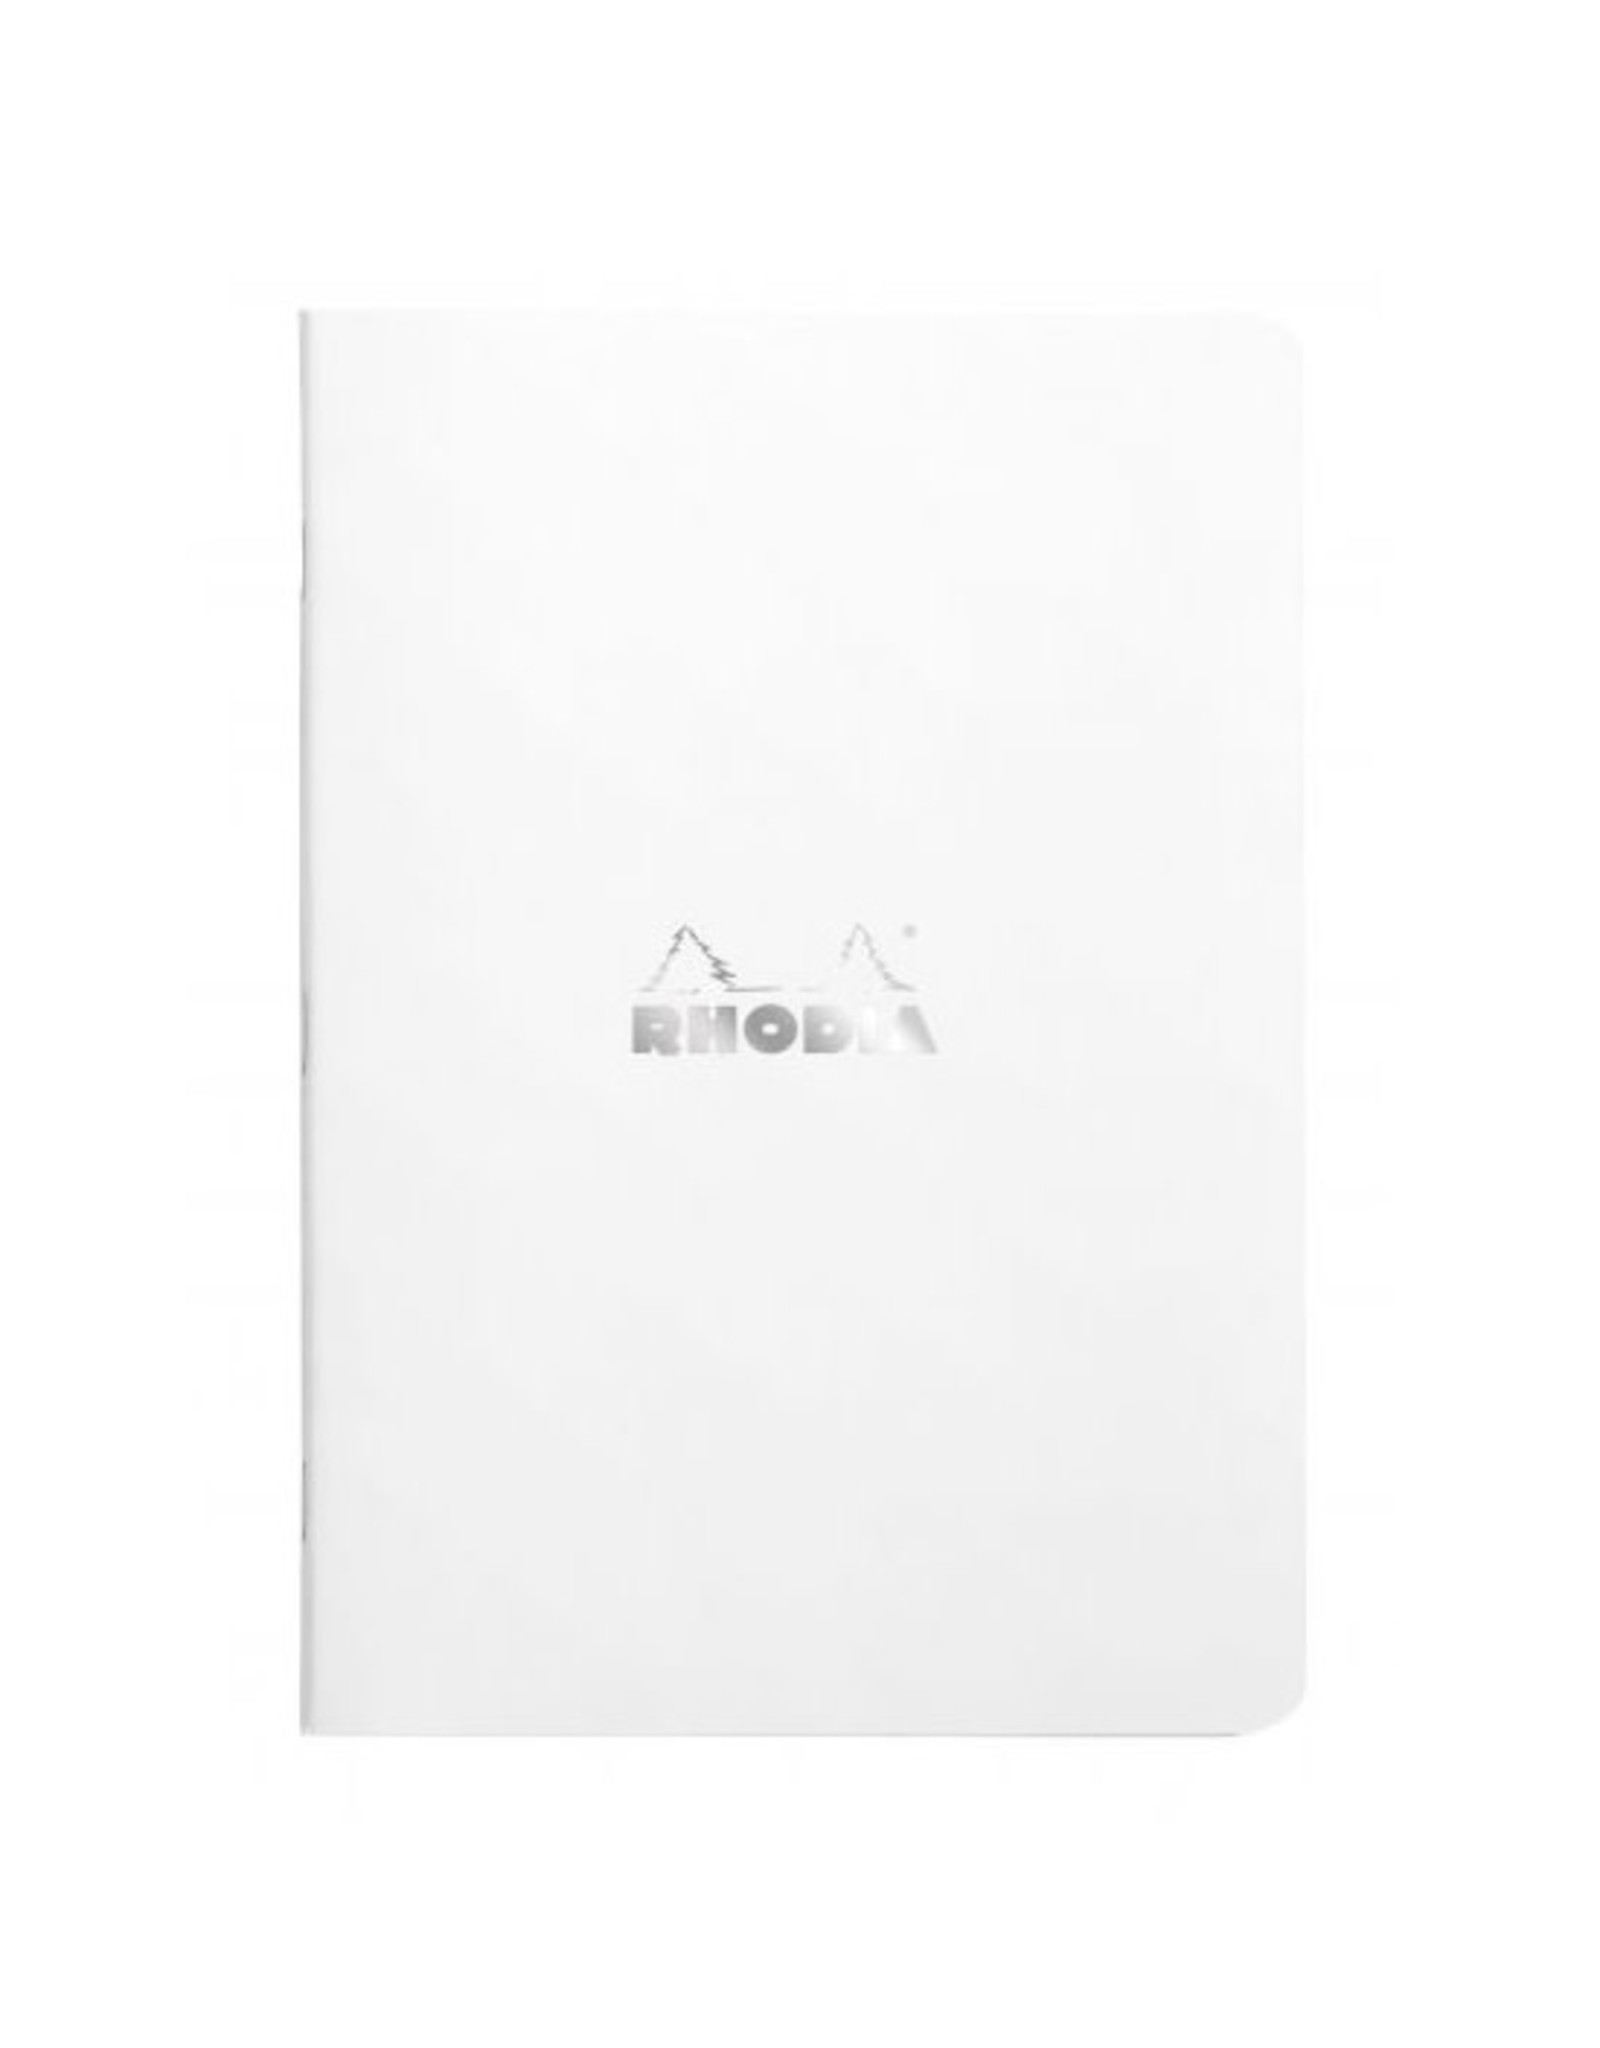 Rhodia White ICE Lined Classic Notebook 6 x 8.25